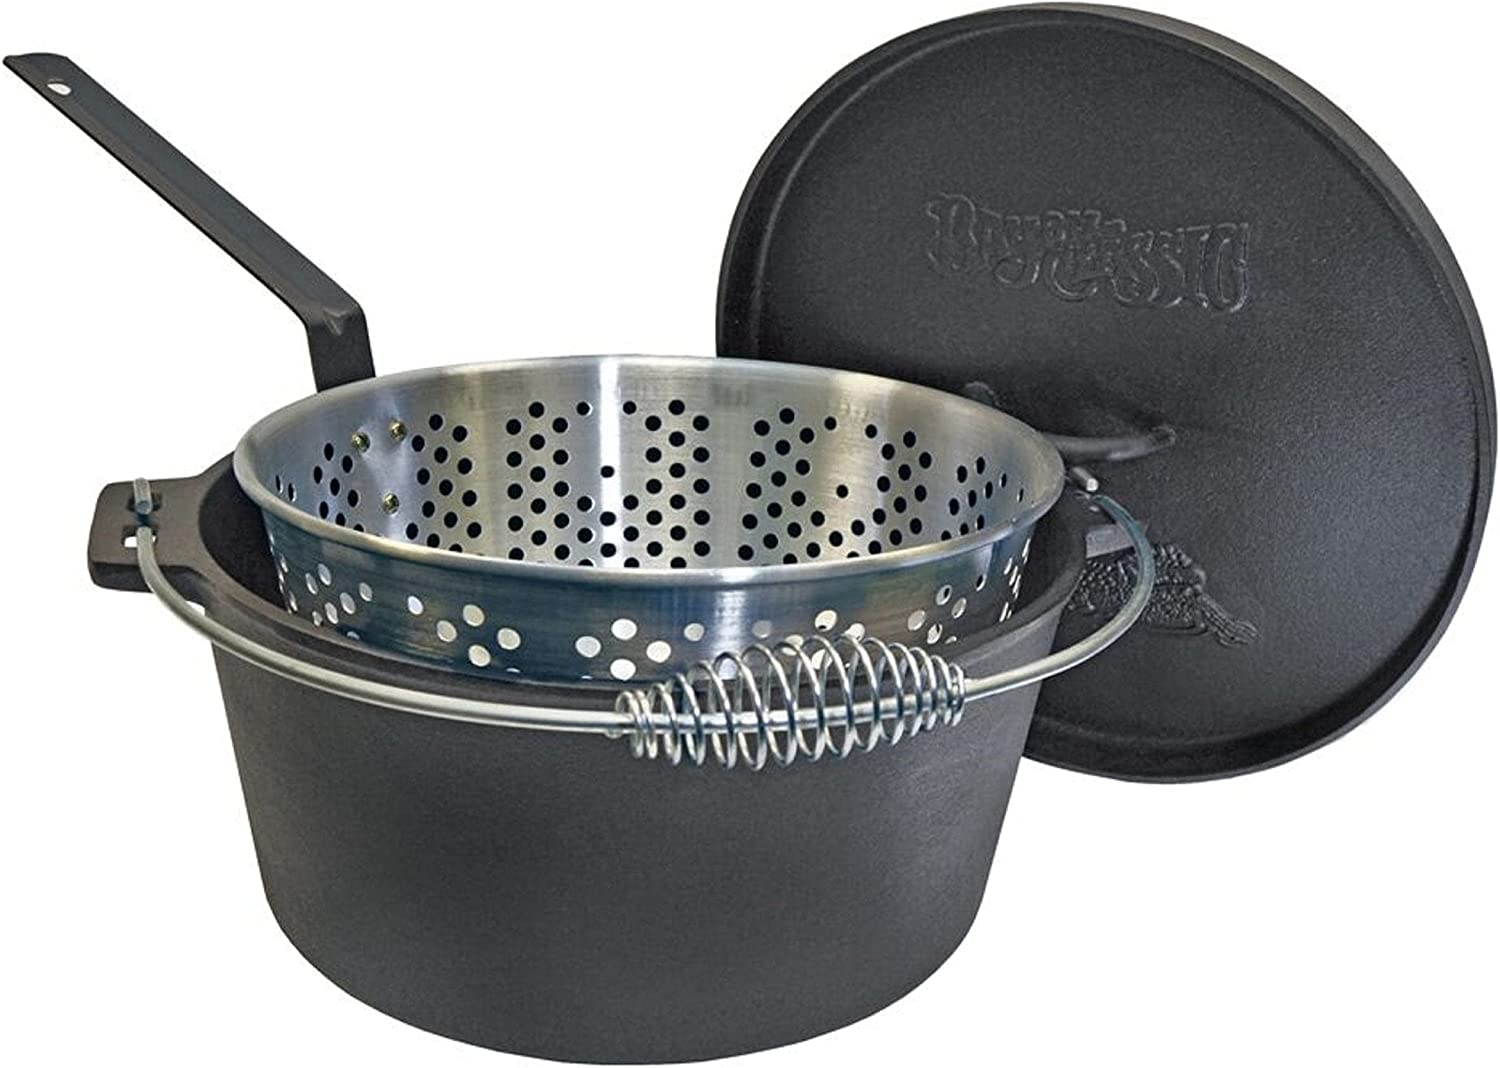 Bayou Classic 7420 20-qt Cast Iron Dutch Oven w/ Fry Basket Features Flanged Camp Lid Perforated Aluminum Basket Stainless Coil Wire Handle Grip Perfect For Frying Fish Chicken Shrimp &amp; More